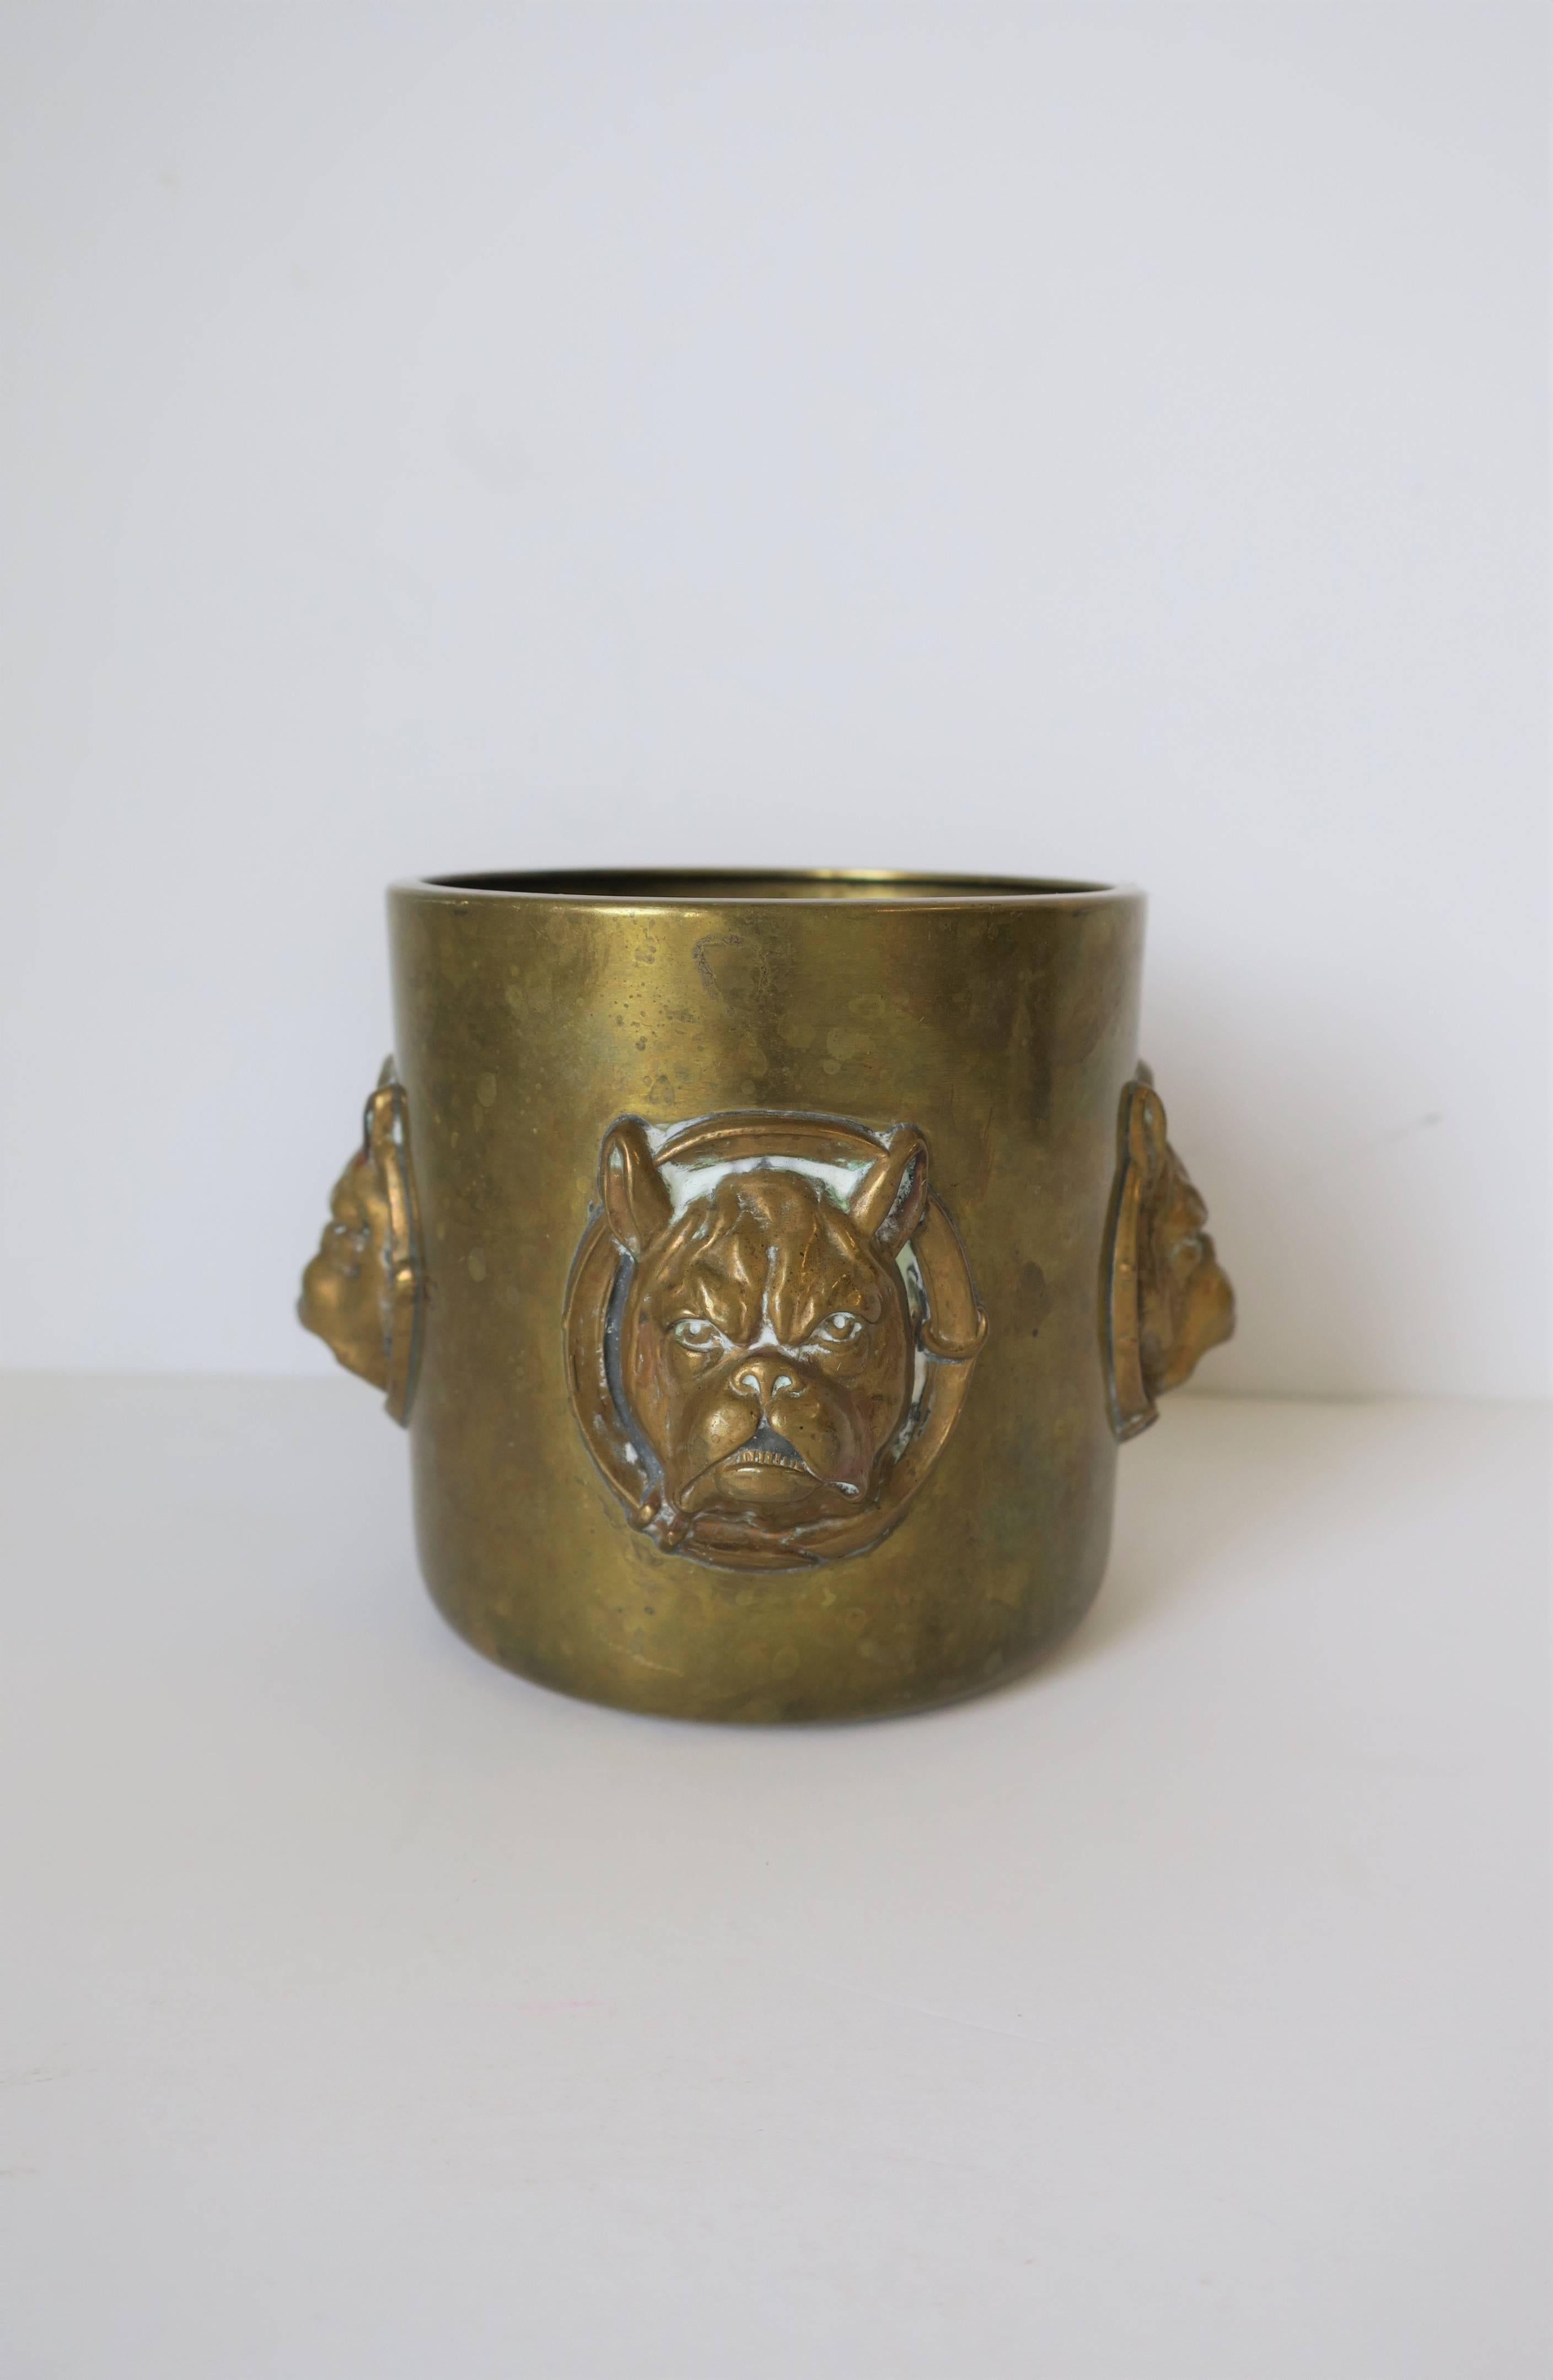 A vintage brass cup or desk writing utensil holder with bulldog face sculpture motif. Great detail in bulldog's face as show in images. There are four bulldog face sculptures around cup as show in images. 

Cup measures: 3 in height x 3 in